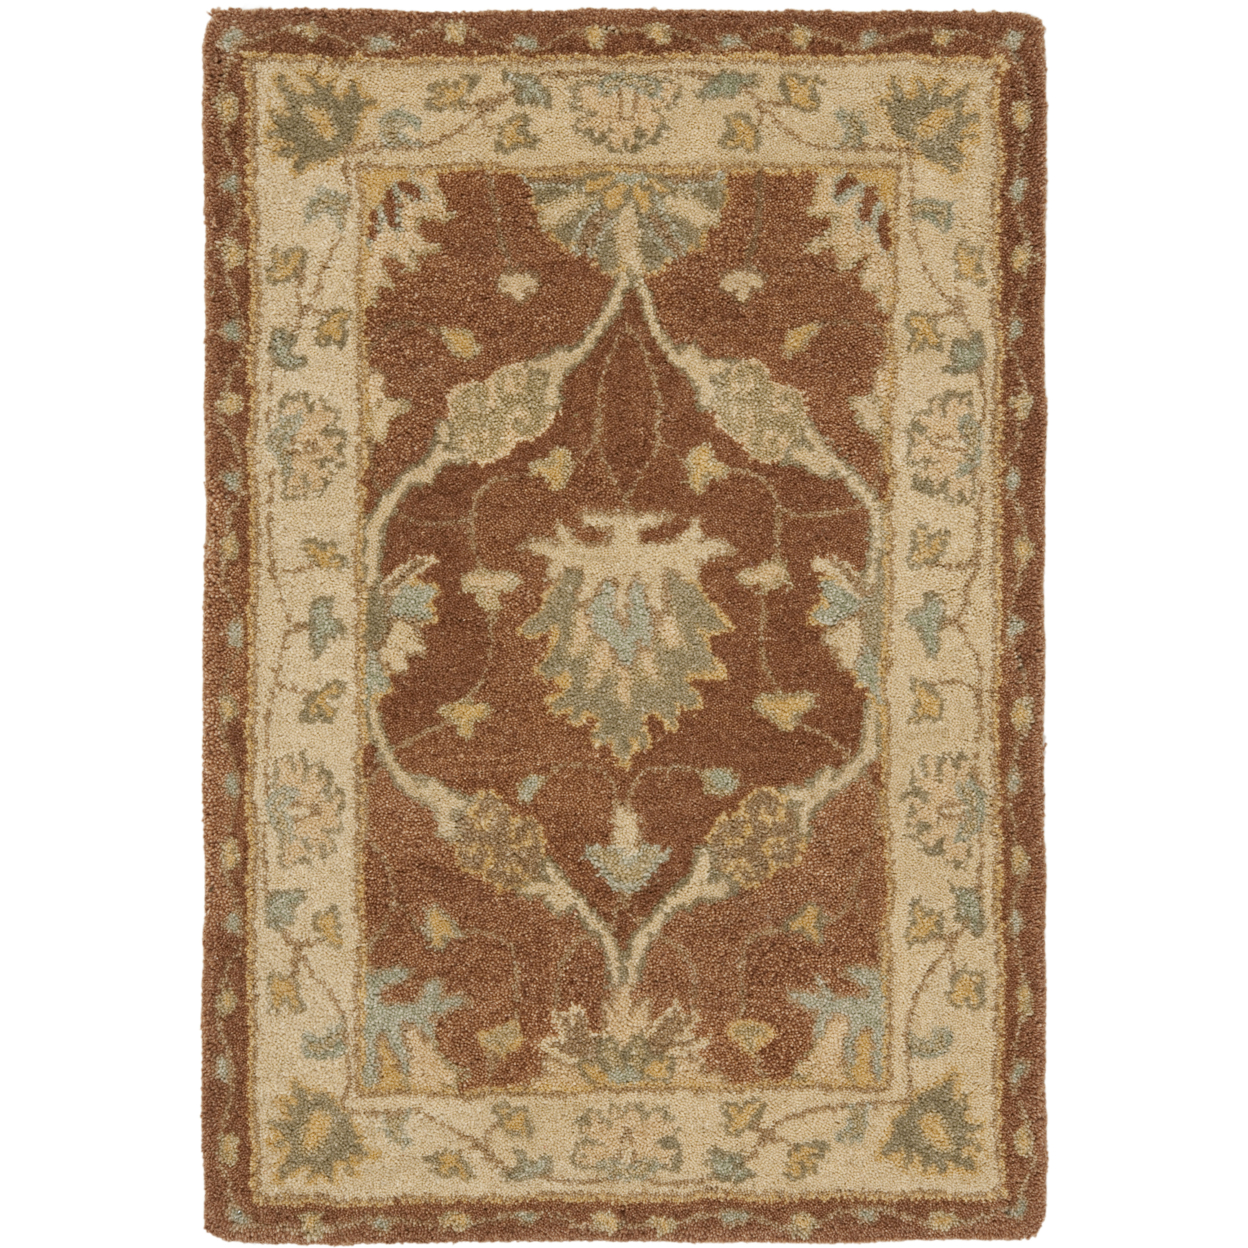 SAFAVIEH Antiquity AT315A Handmade Brown / Taupe Rug - 8' Round